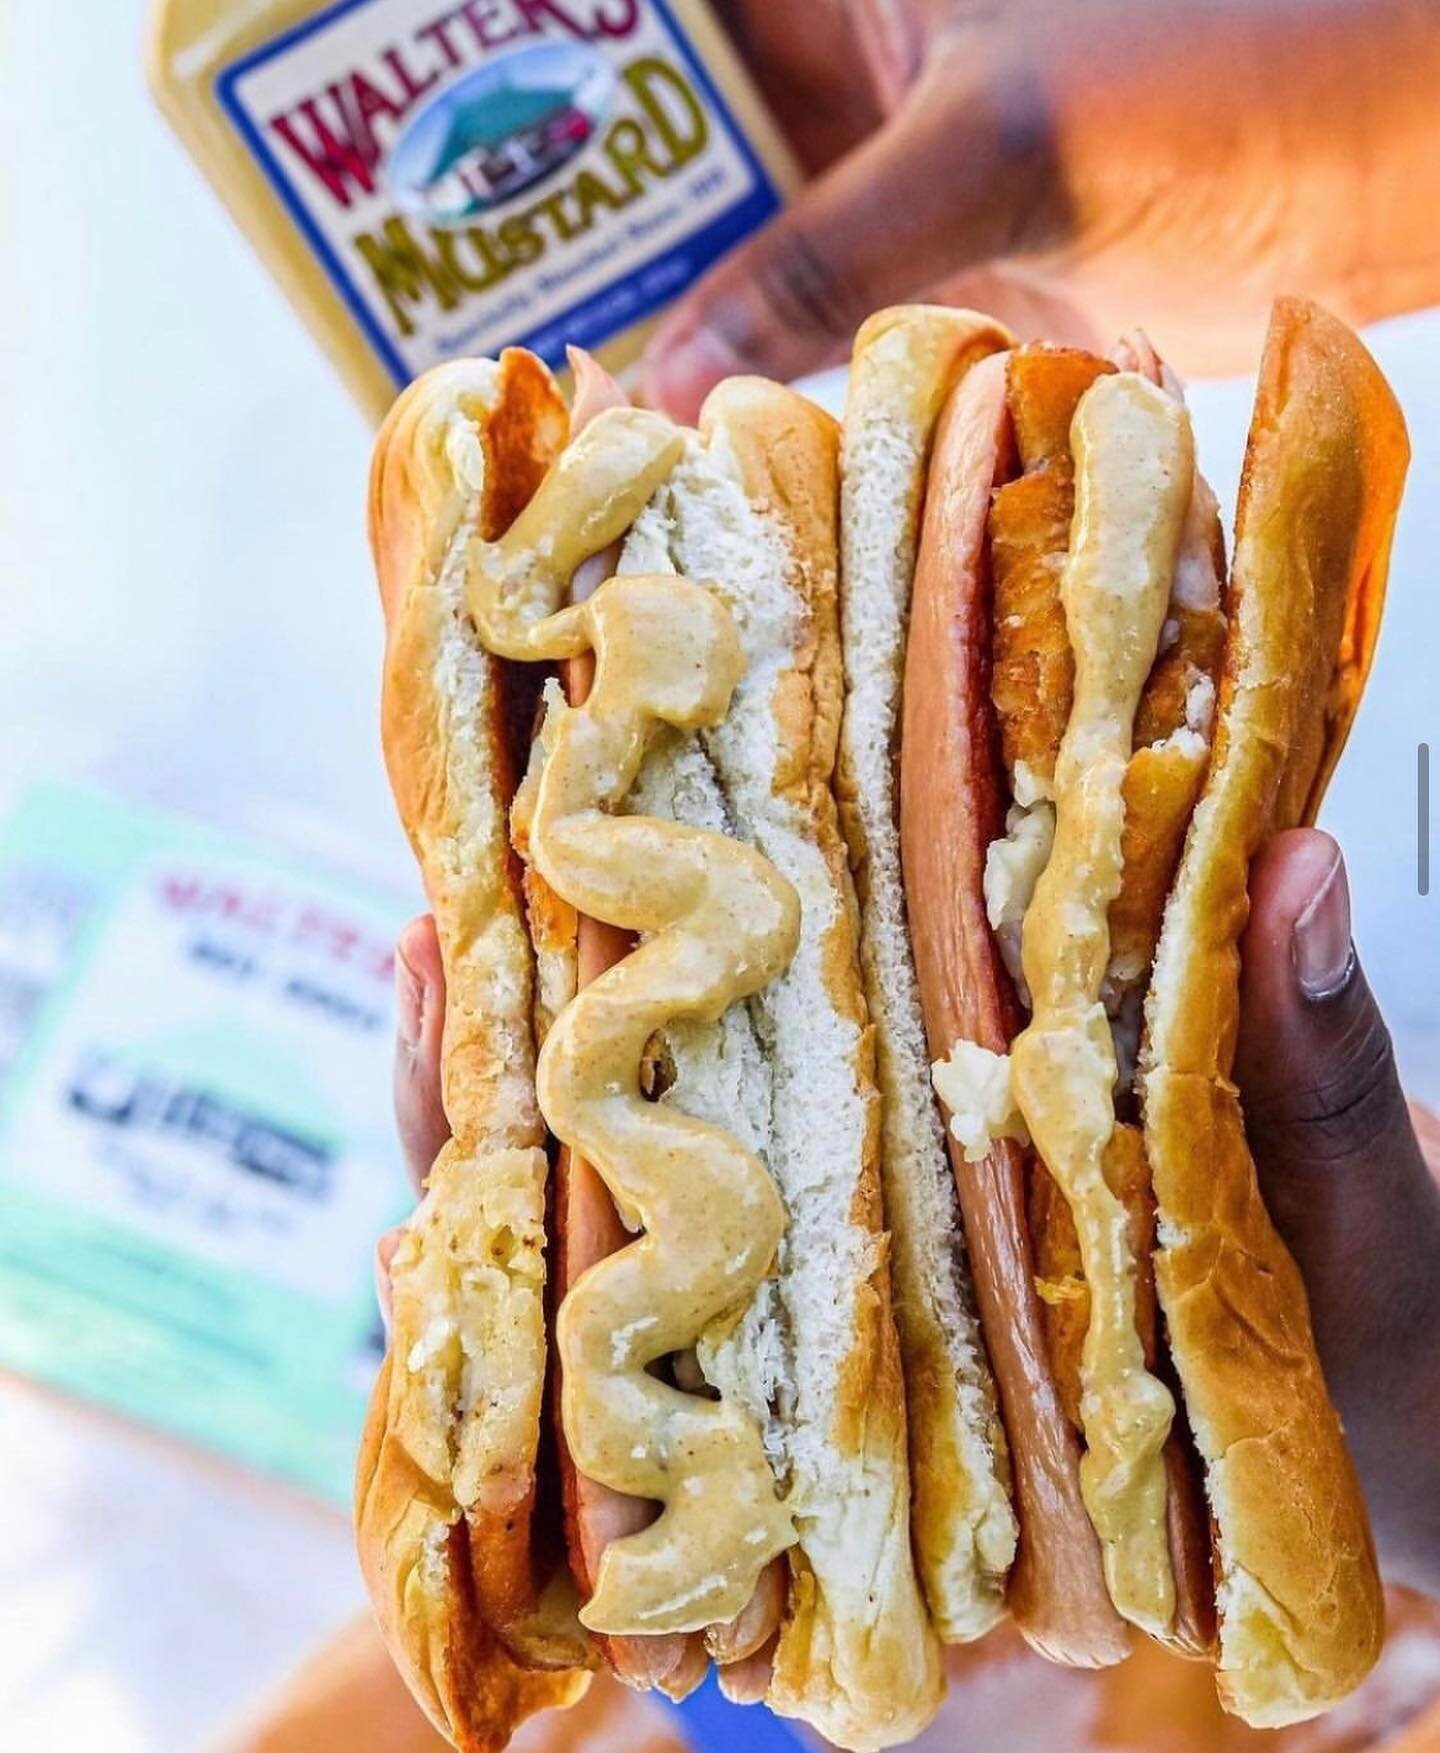 Happy National Mustard Day!
What makes Walter&rsquo;s mustard different? Our signature mustard is blended with relish for a sweet kick! 

📷 @foodforkash